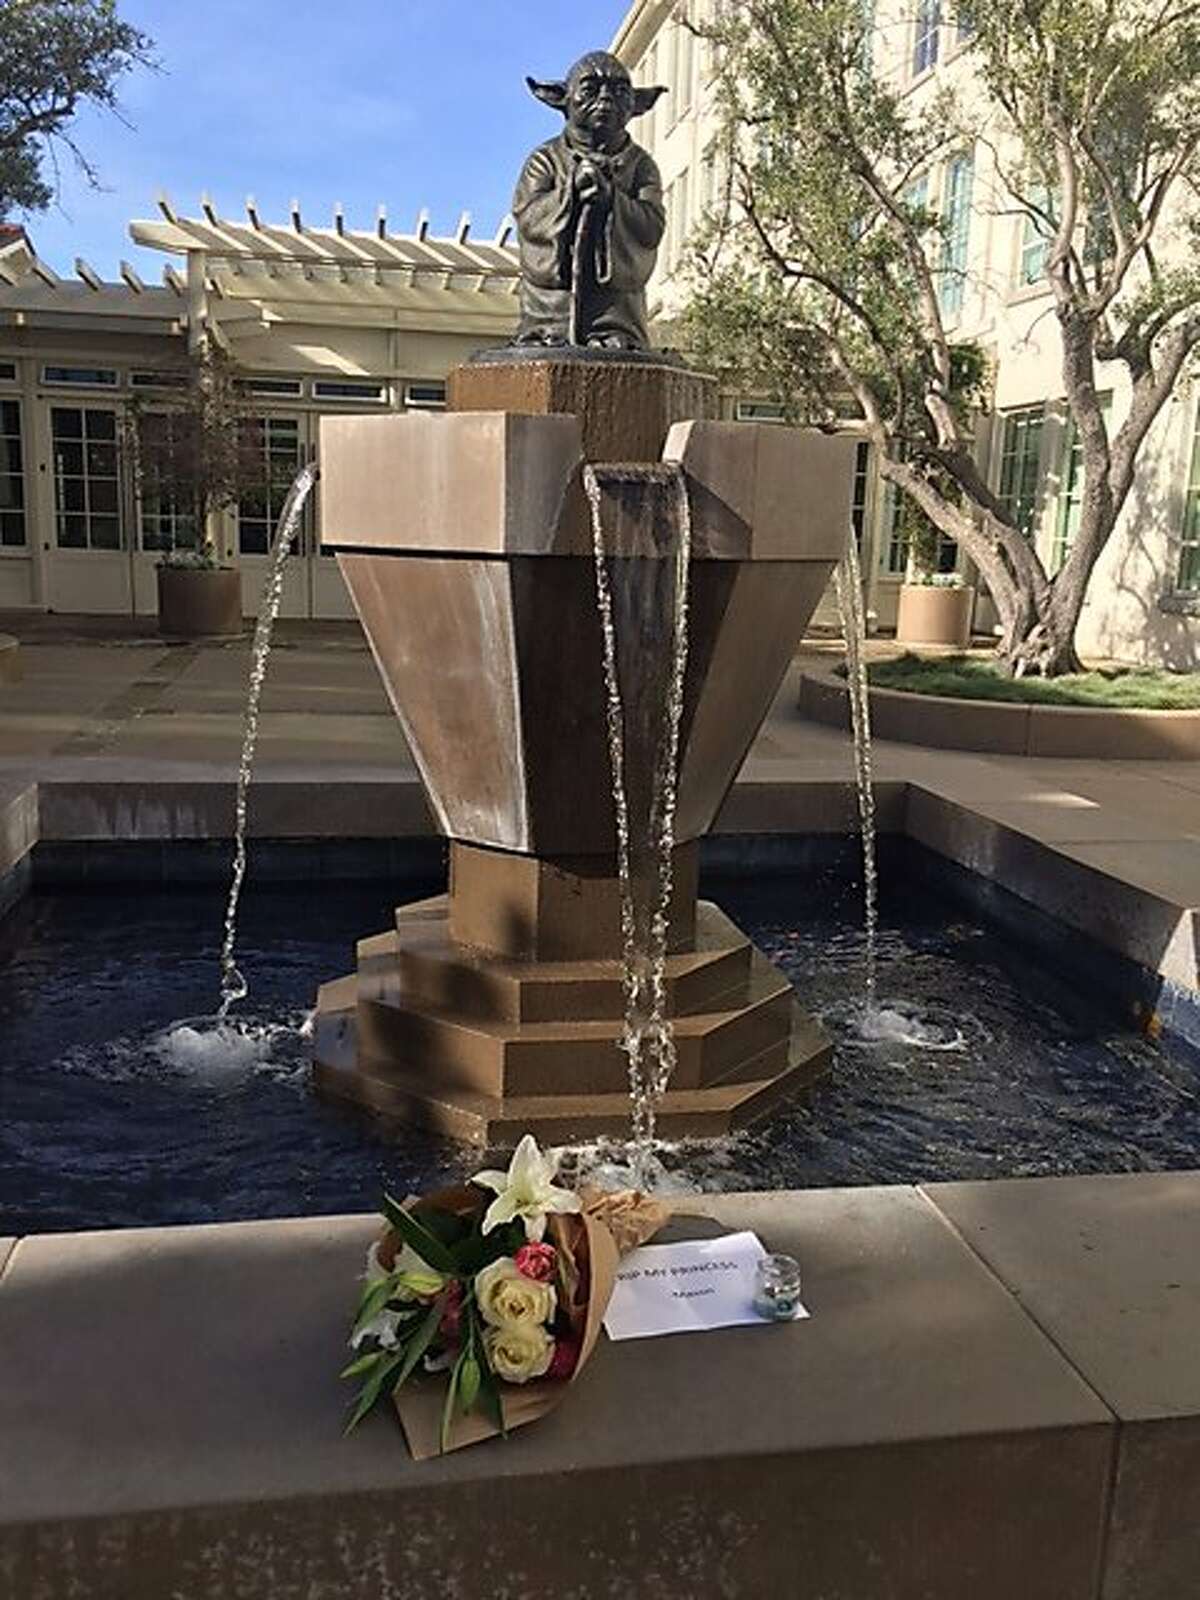 A tribute to Carrie Fisher sits at the Yoda fountain in front of Lucasfilm offices in San Francisco on Thursday, December 27, 2017.